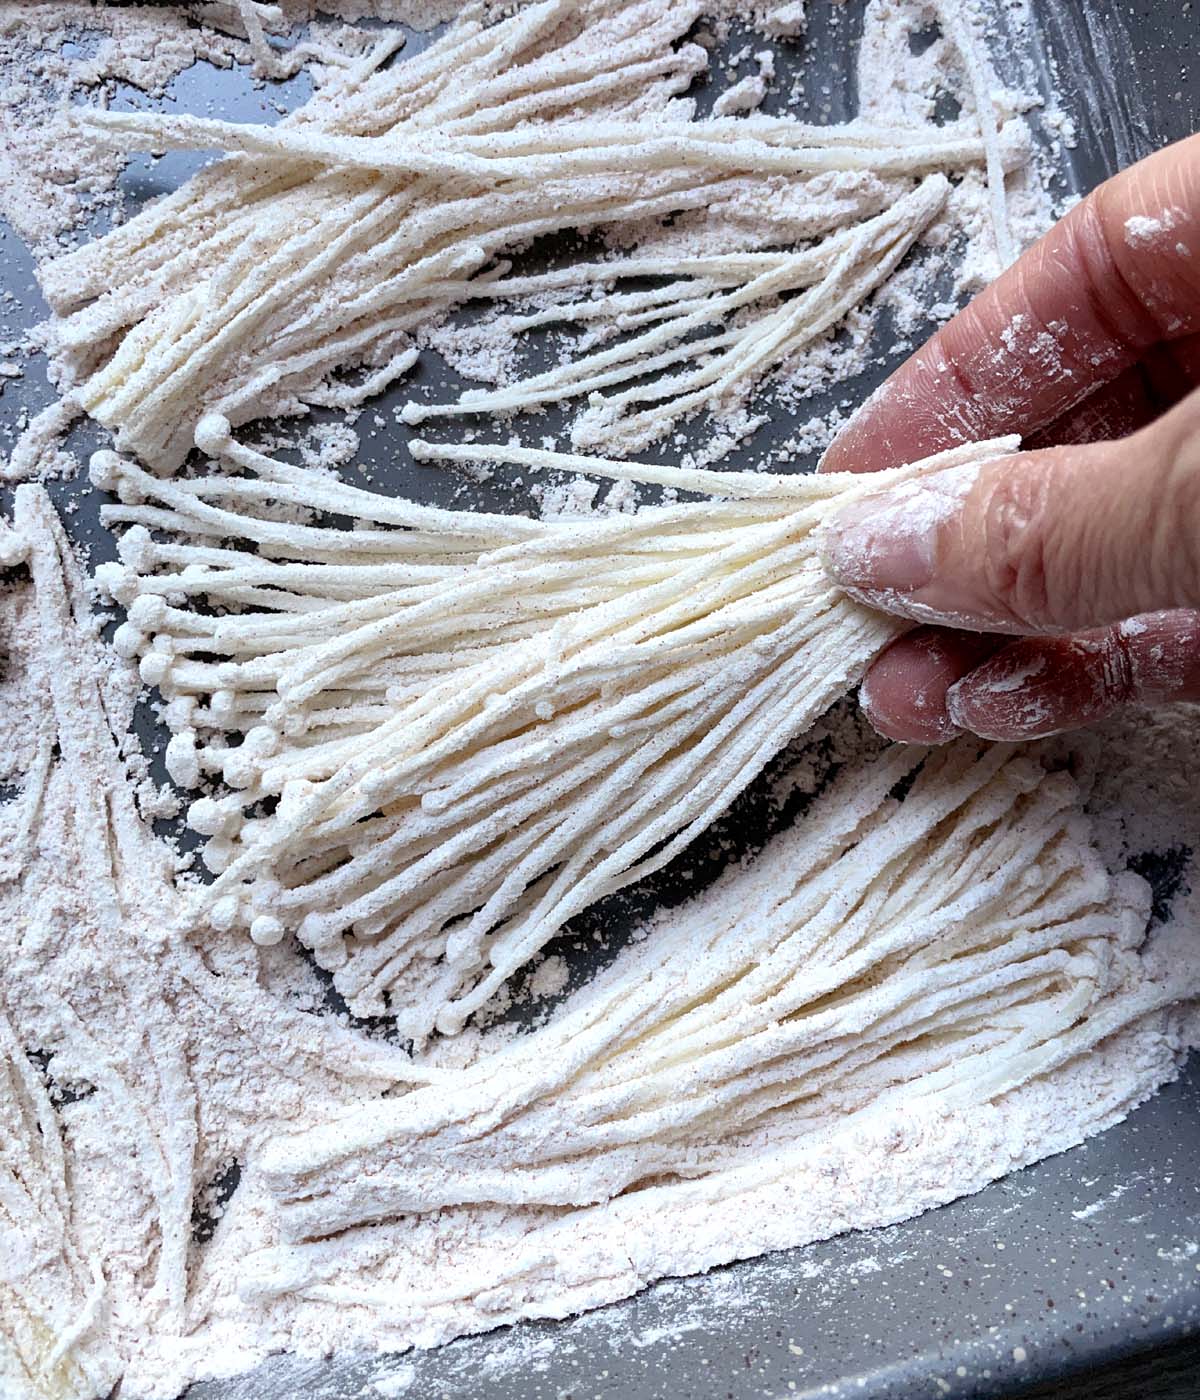 A hand holding a bundle of raw enoki mushrooms coated in white flour.